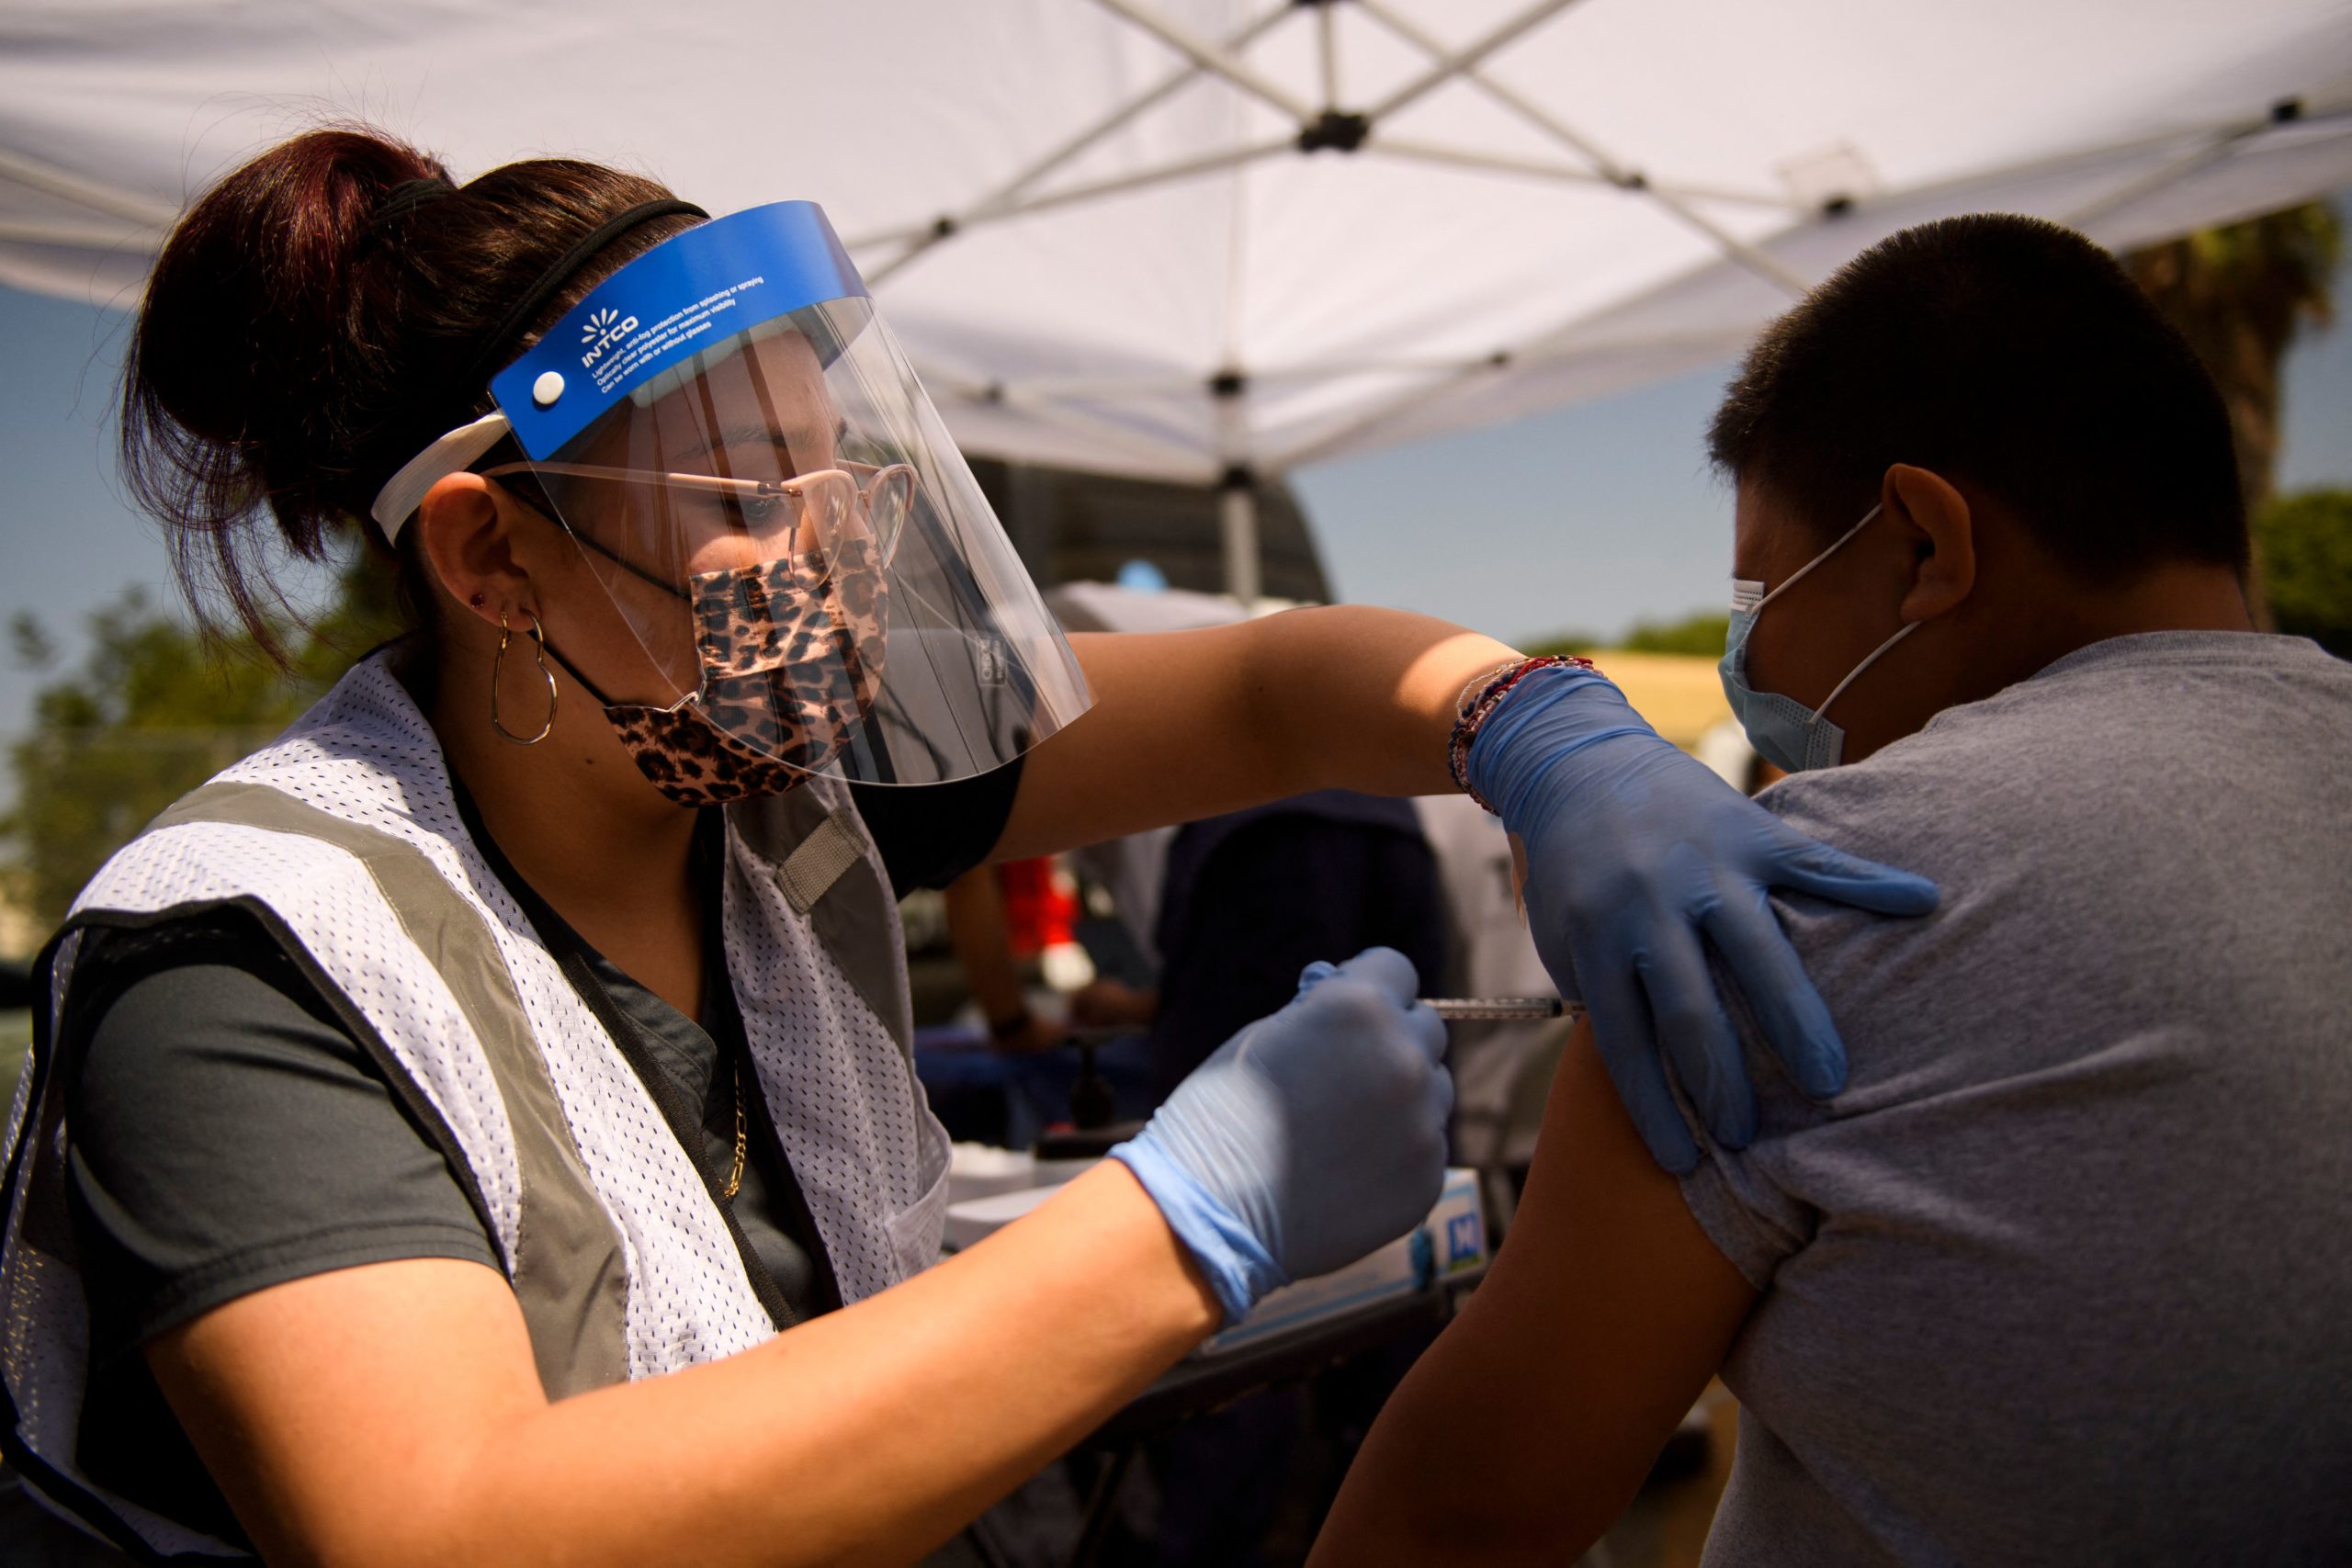 A 12-year-old receives a first dose of the Pfizer Covid-19 vaccine at a mobile vaccination clinic during a back to school event offering school supplies, Covid-19 vaccinations, face masks, and other resources for children and their families at the Weingart East Los Angeles YMCA in Los Angeles, California on August 7, 2021. (Photo by Patrick T. FALLON / AFP) (Photo by PATRICK T. FALLON/AFP via Getty Images)